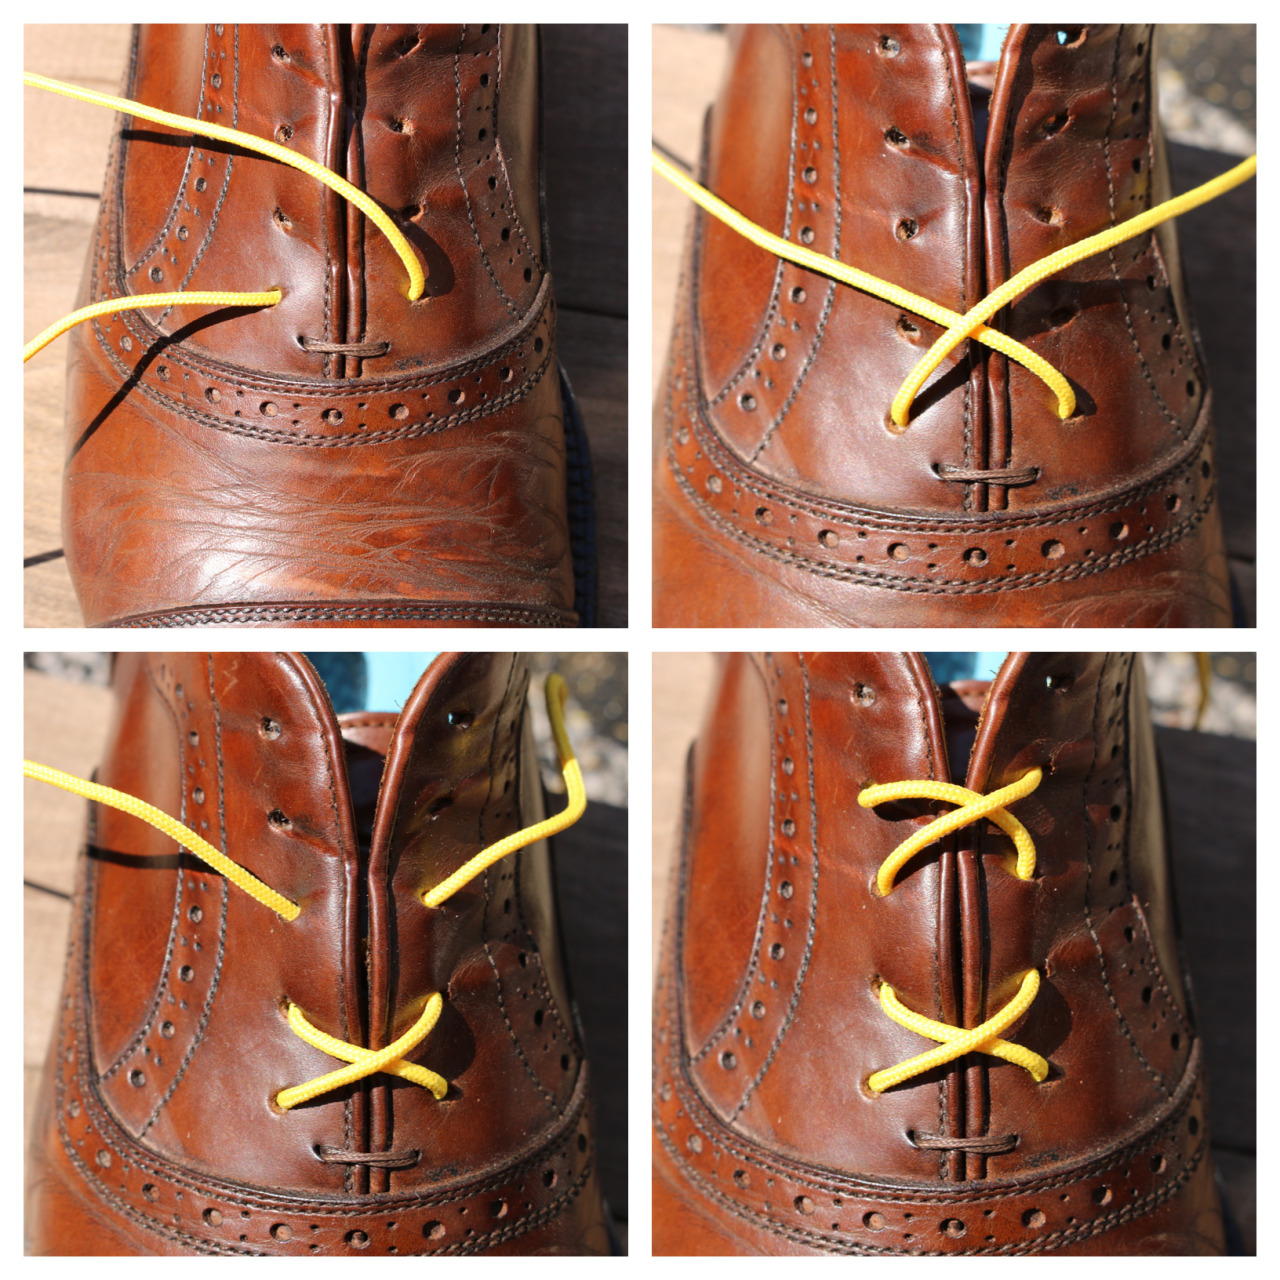 LACES FOR YOUR SHOES